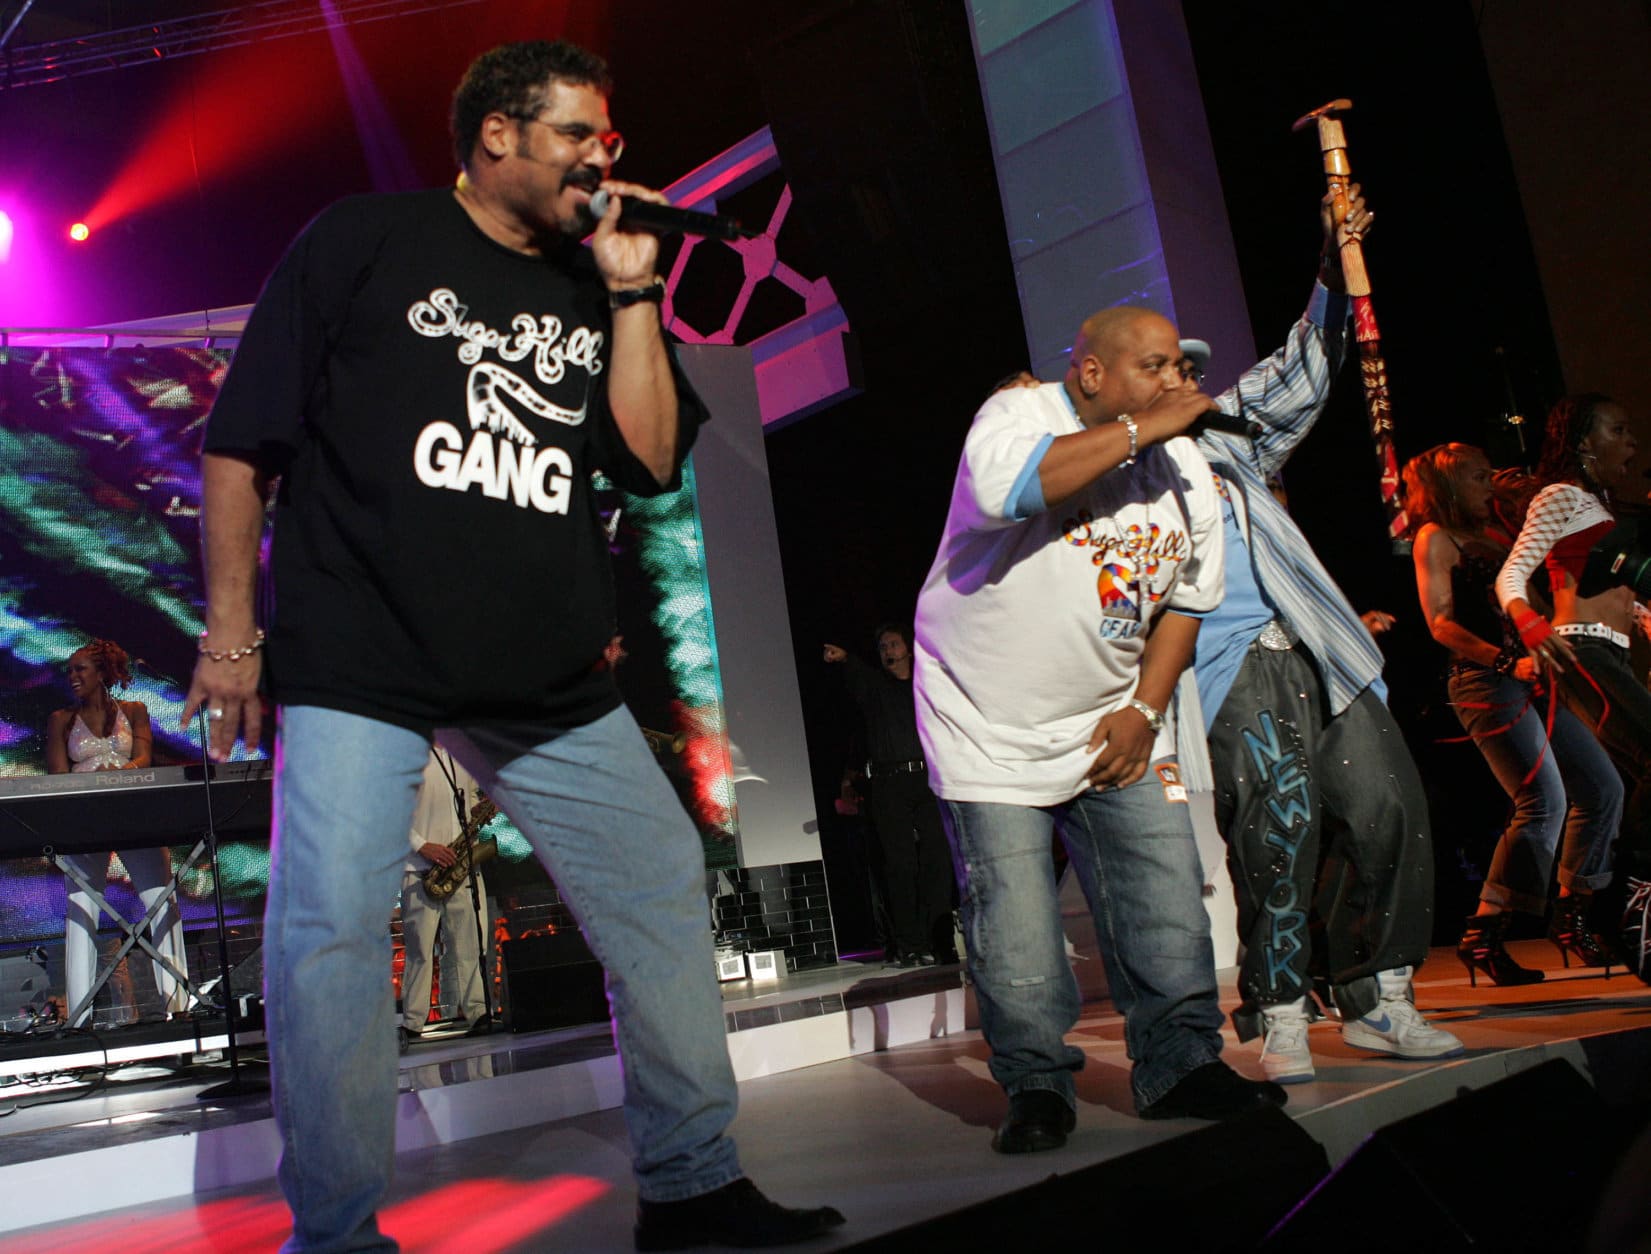 NEW YORK - OCTOBER 03:  The Sugarhill Gang perform onstage at the close of the VH1 Hip Hop Honors at the Hammerstein Ballroom October 3, 2004 in New York City.  (Photo by Frank Micelotta/Getty Images)